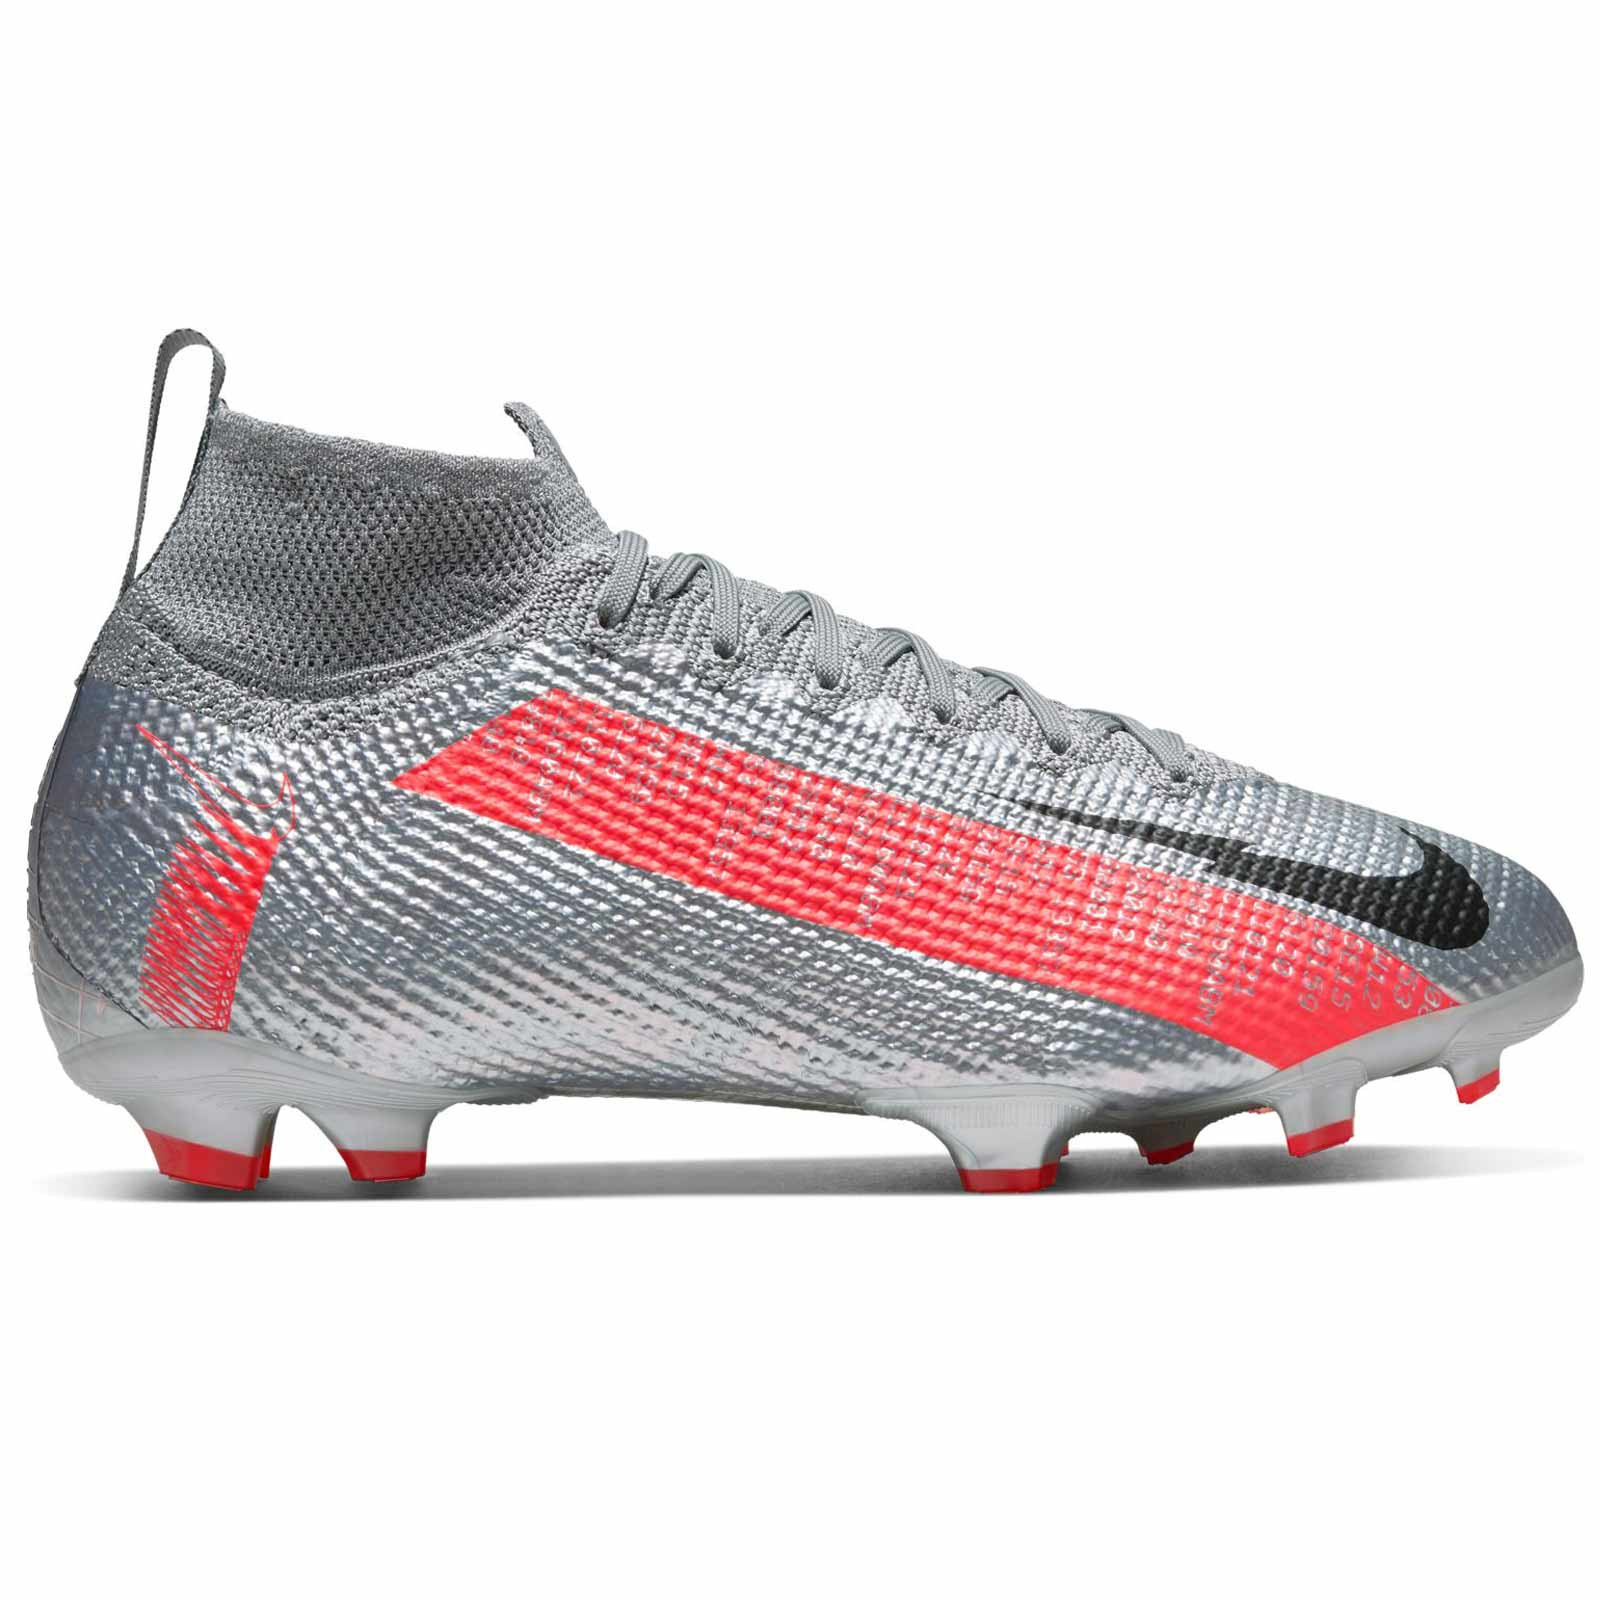 Nike Mercurial Superfly 7 Elite Limited Edition Review U Like.